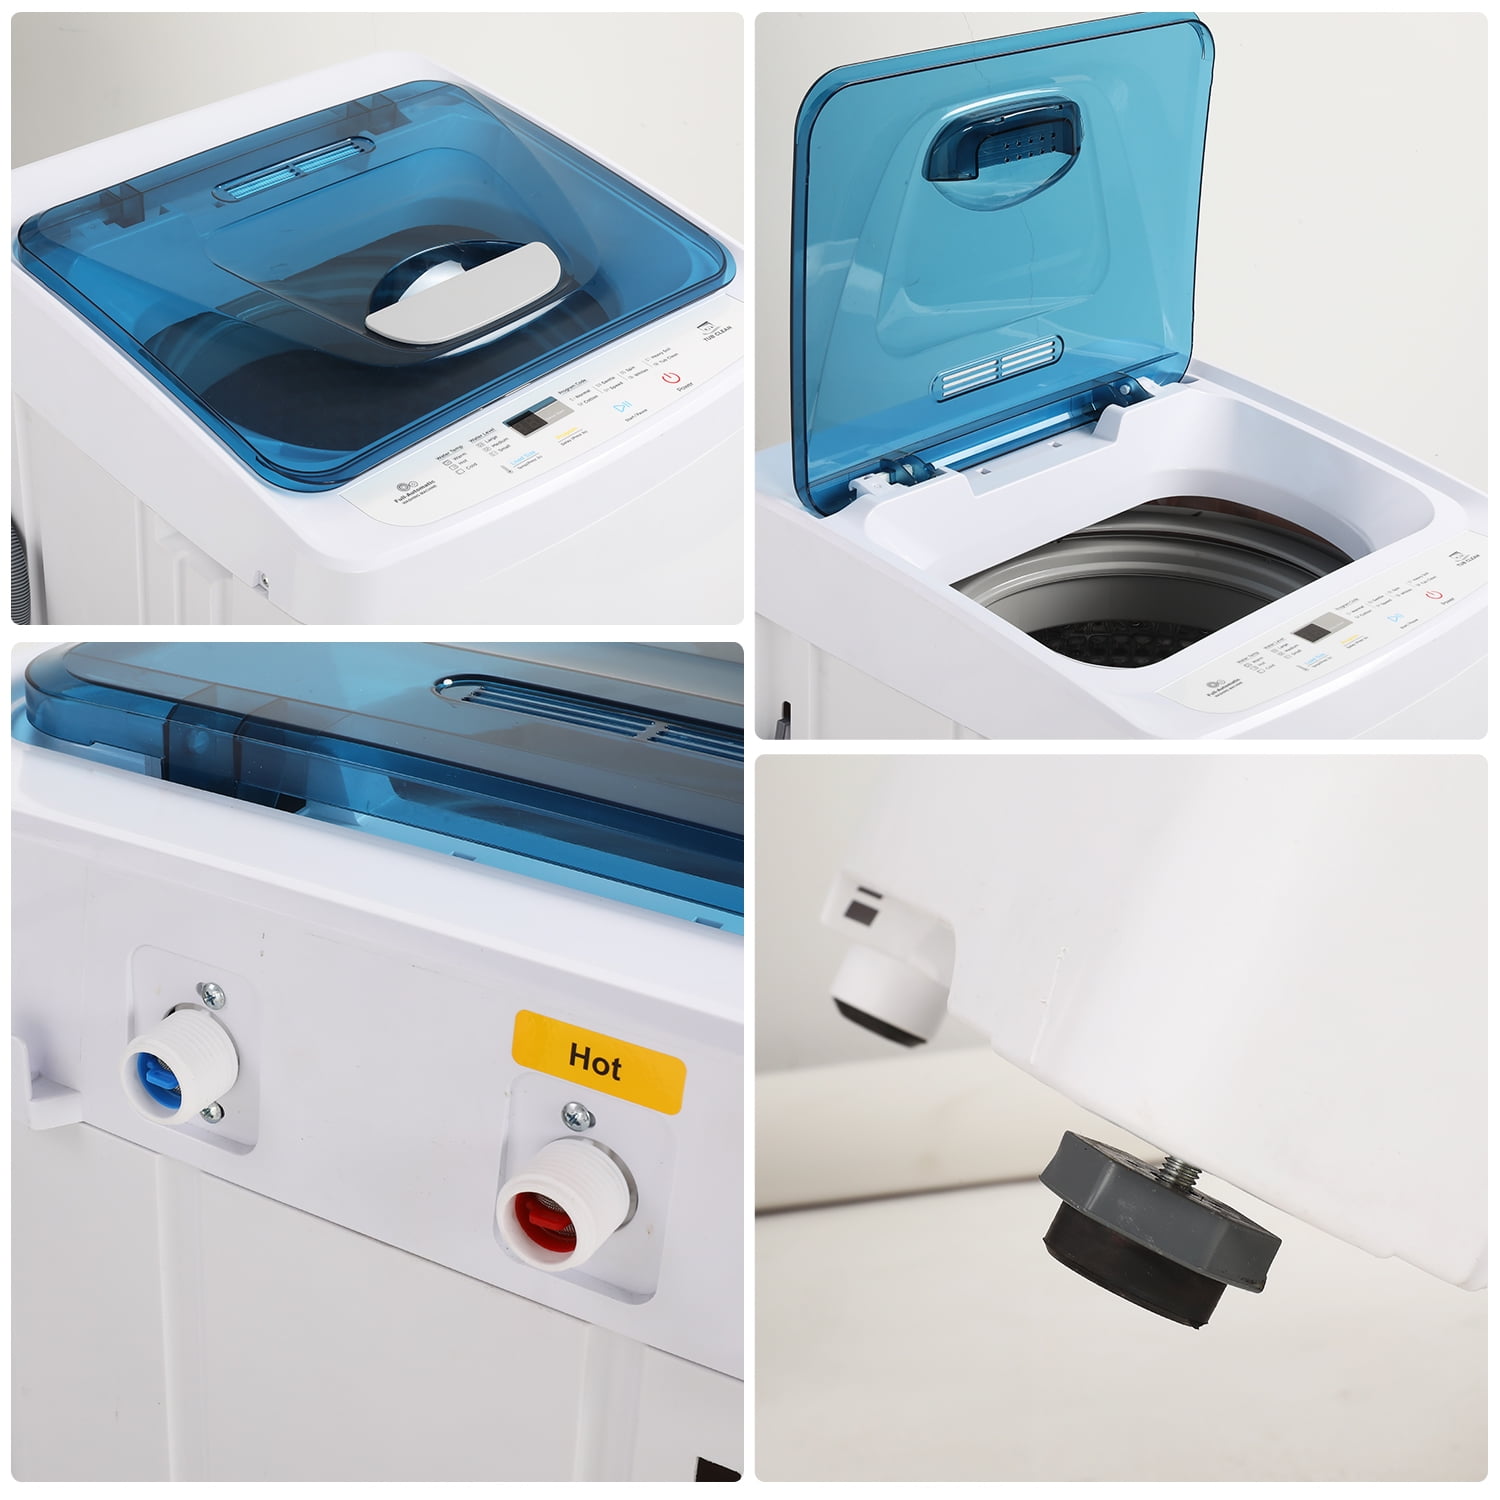 Mini portable washing machine: 10 options to check out in October